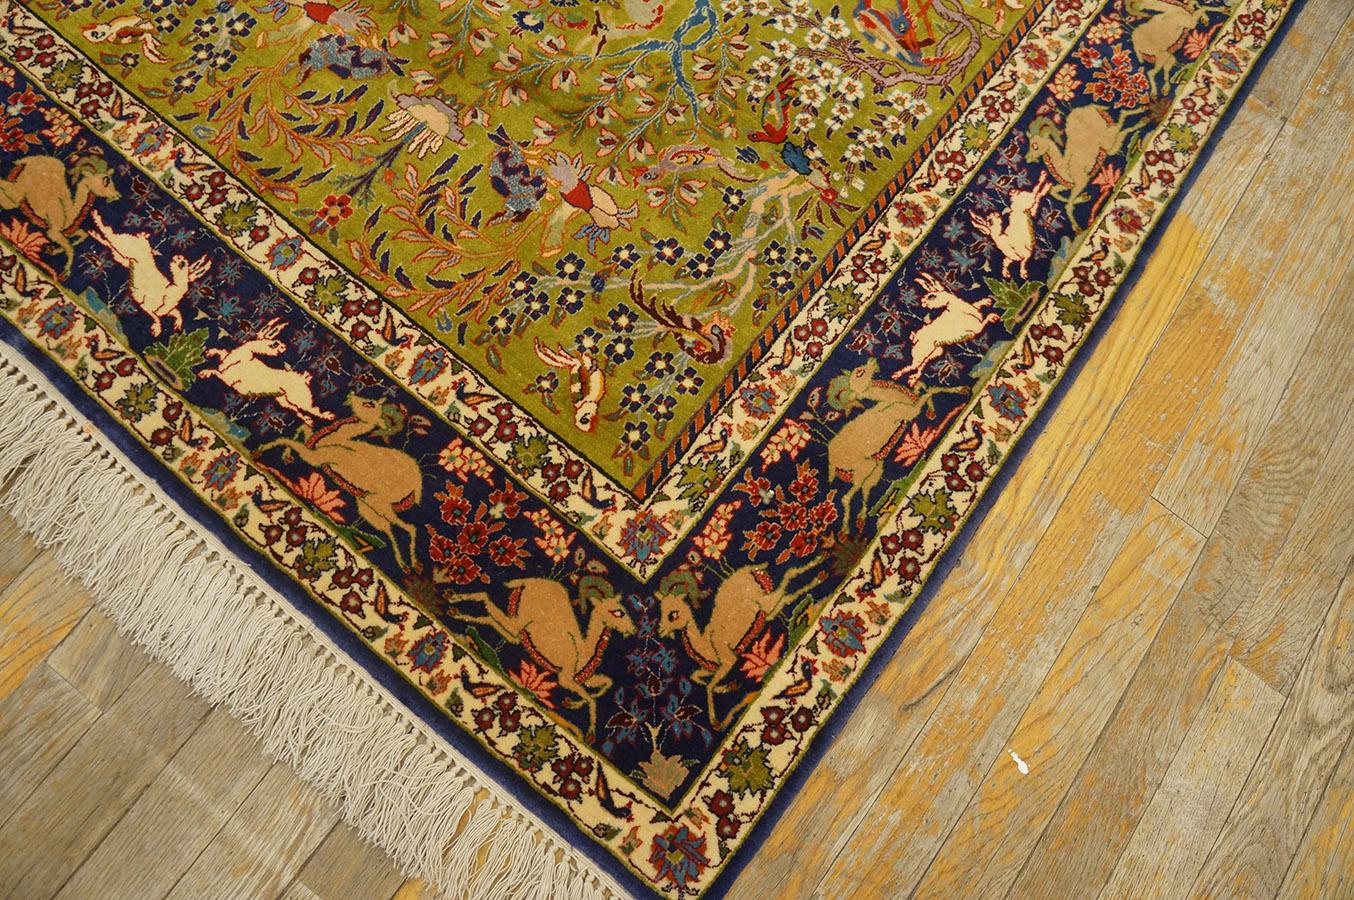 Wool Mid 20th Century Persian Isfahan Carpet ( 3' 6'' x 5' 4'' - 107 x 163 cm) For Sale